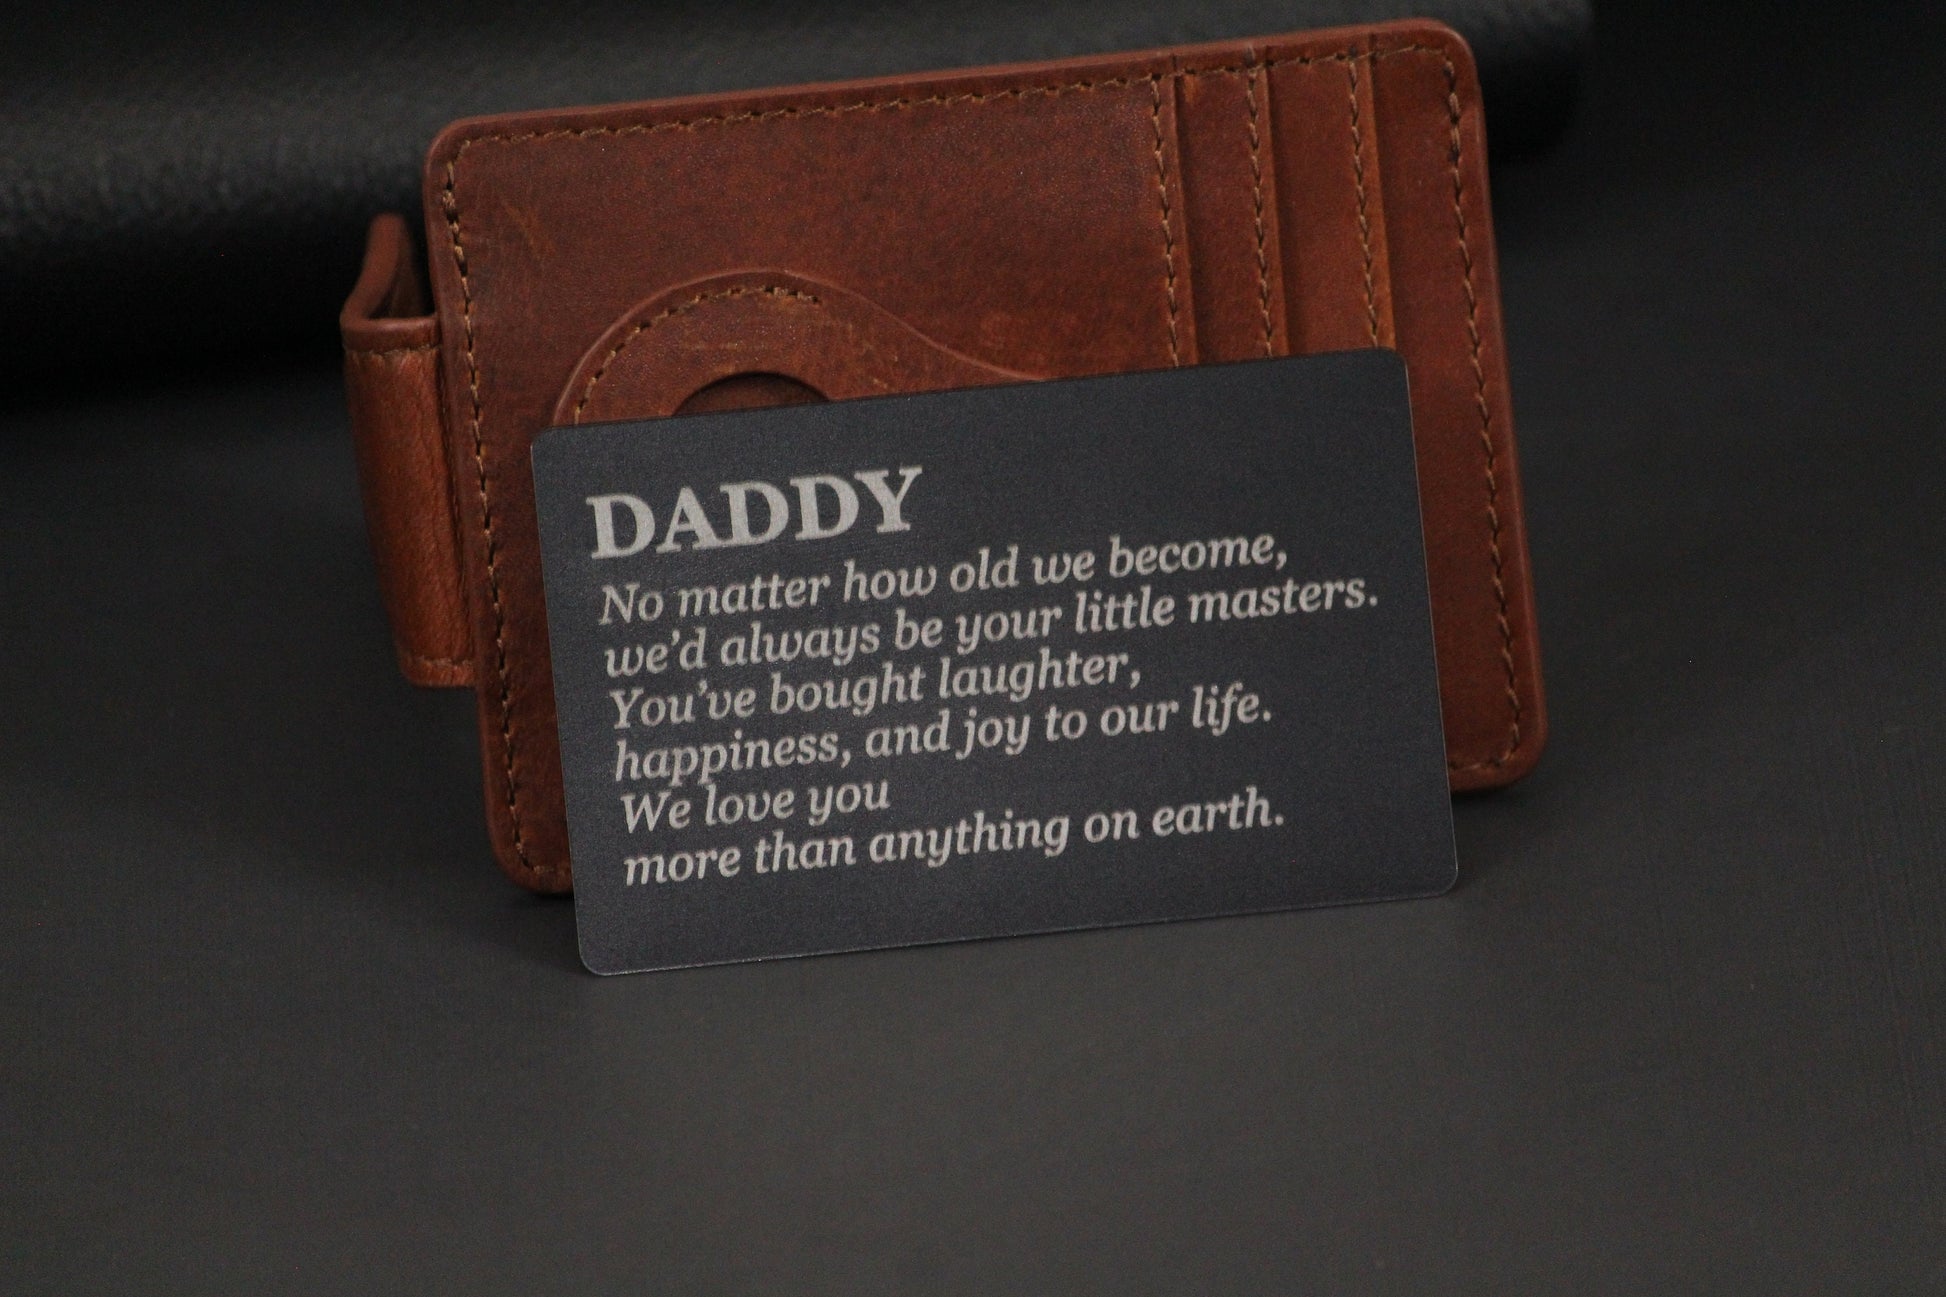 Father's Day Gift, Personalized Engraved Metal Wallet Card Insert, Gift For Daddy, Grandpa, Husband - Birthday, Anniversary, Wedding Gift